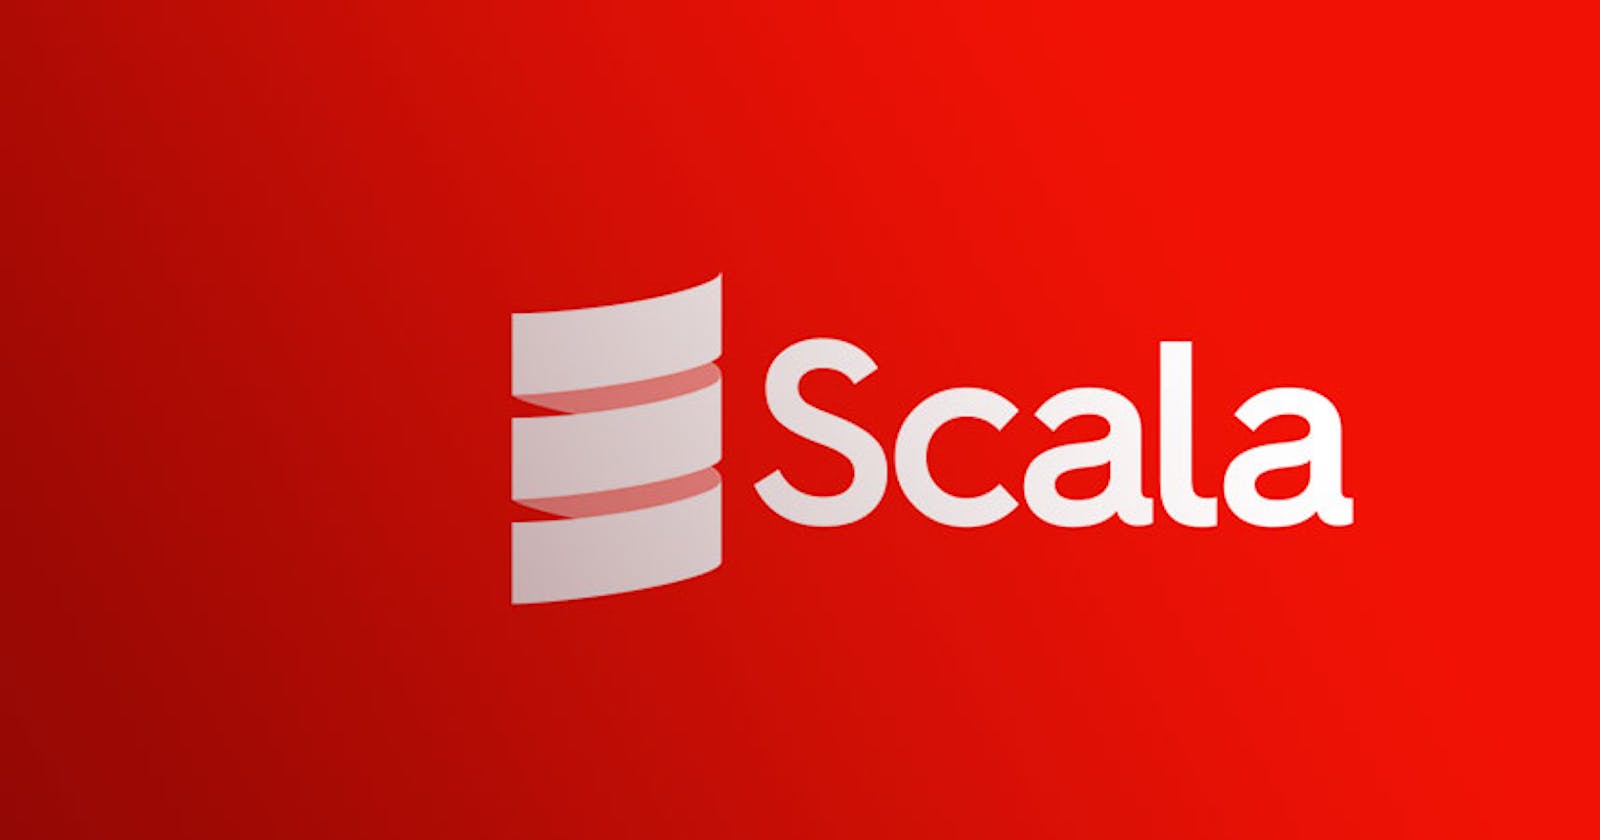 Control Structure and Functions in Scala